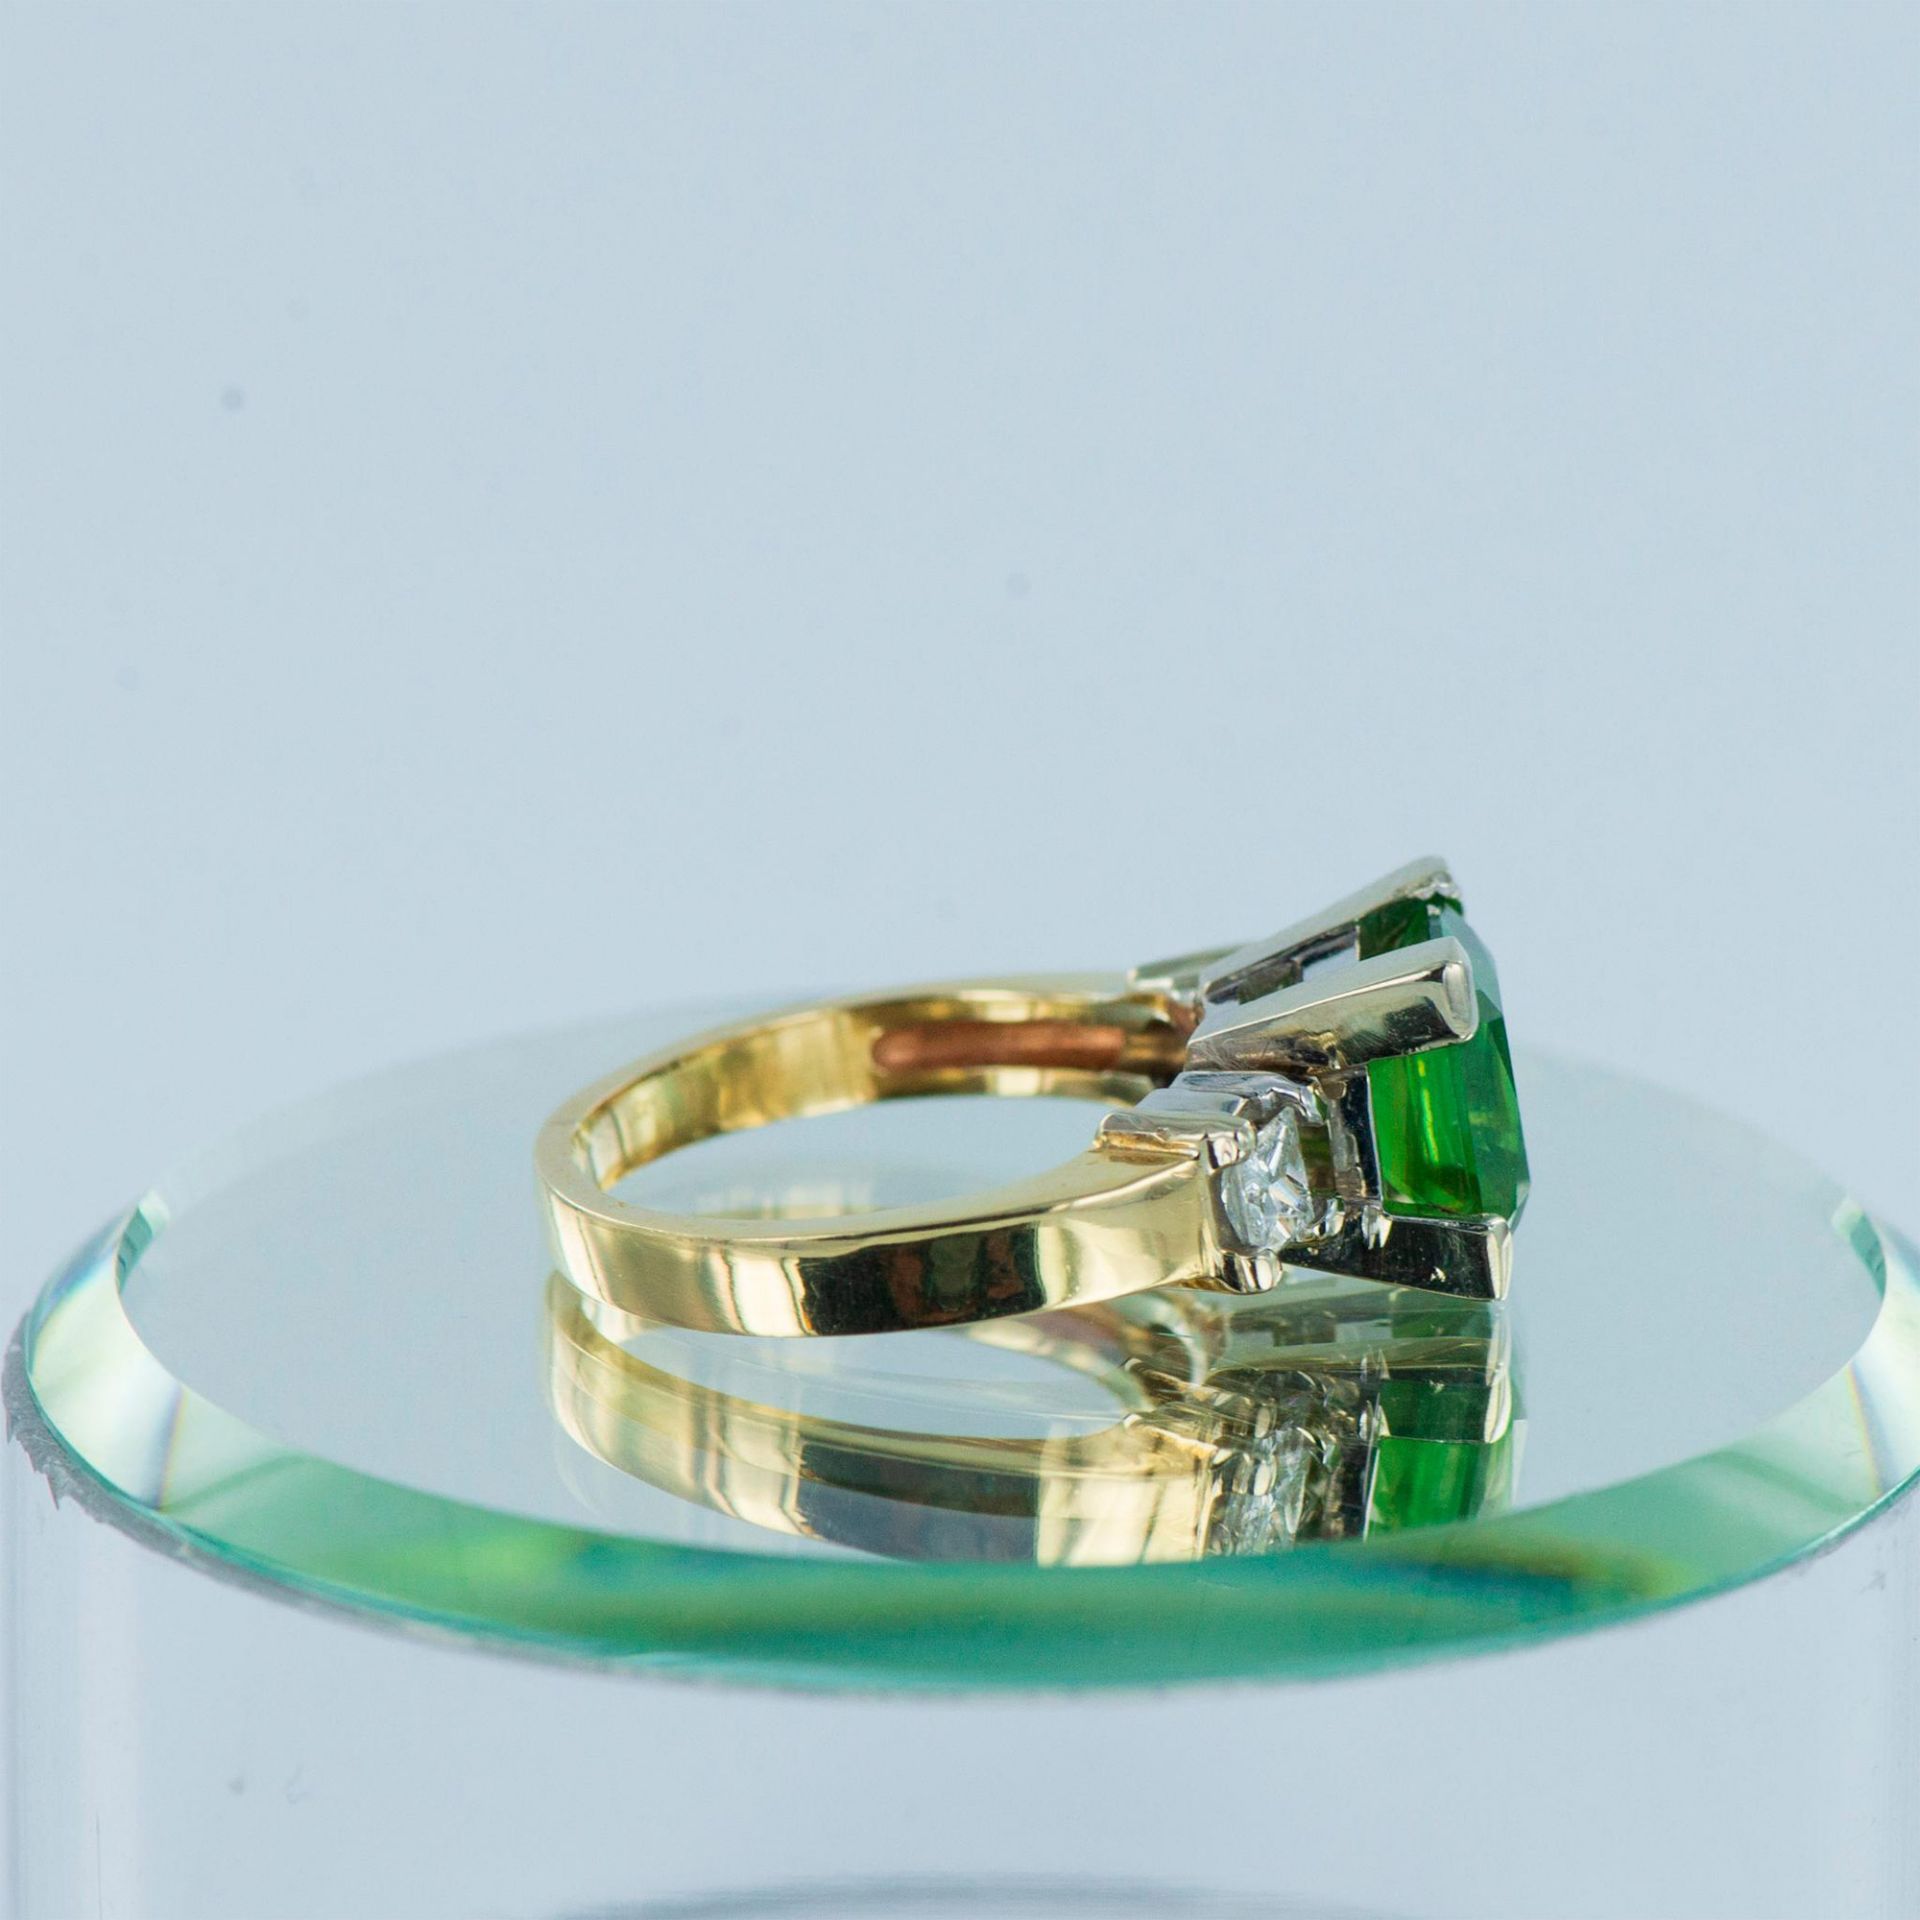 Pretty Two Tone 14K Gold, Emerald and Diamond Ring - Image 6 of 12